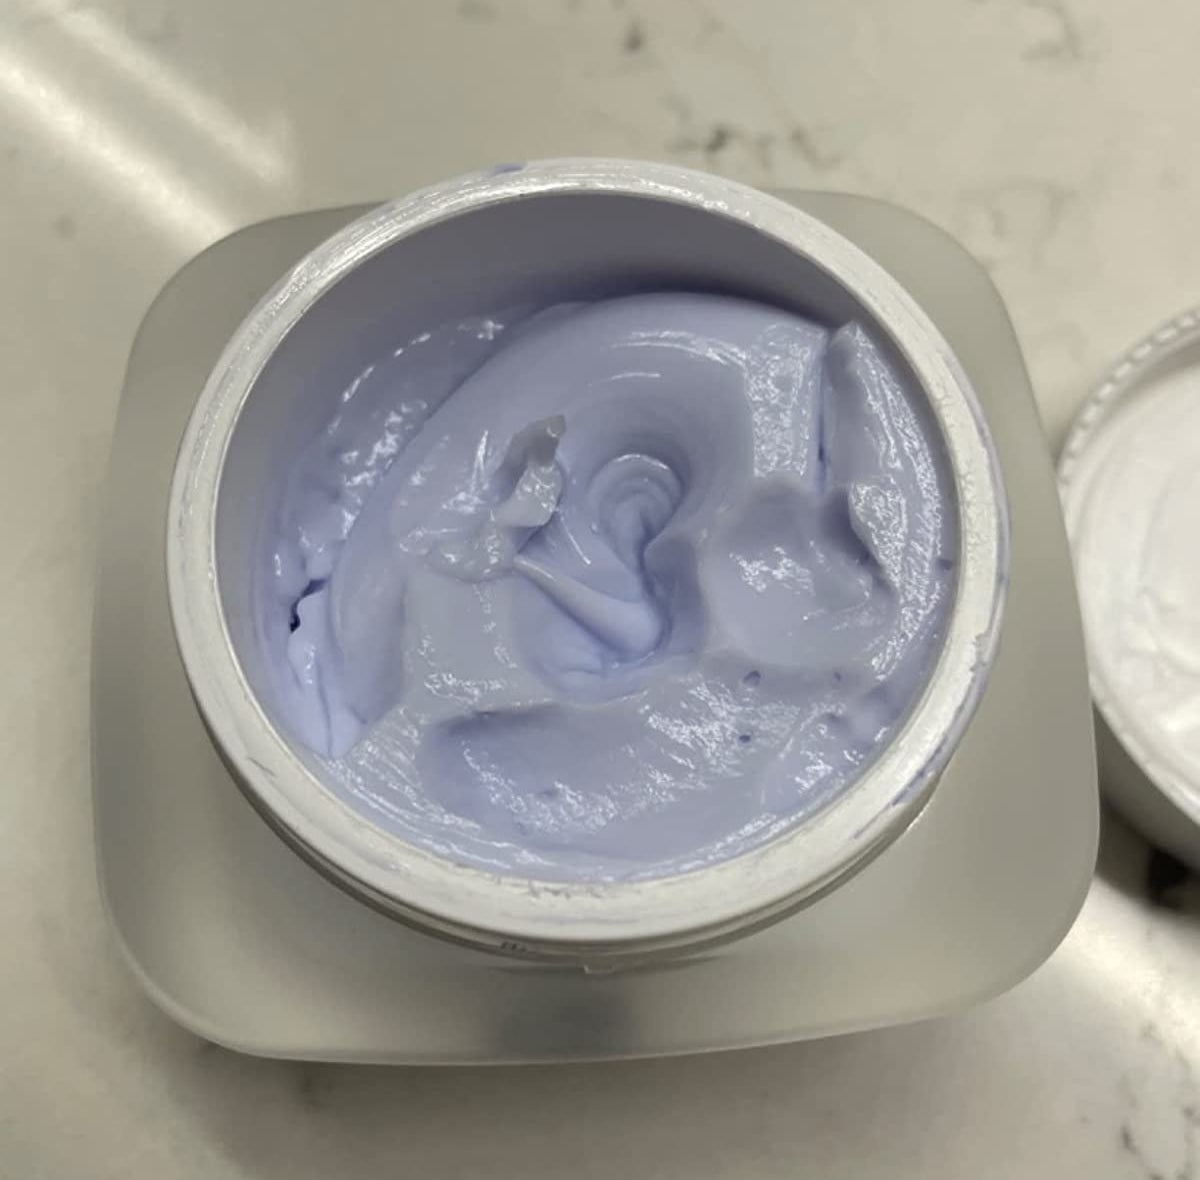 Review photo of the styling paste